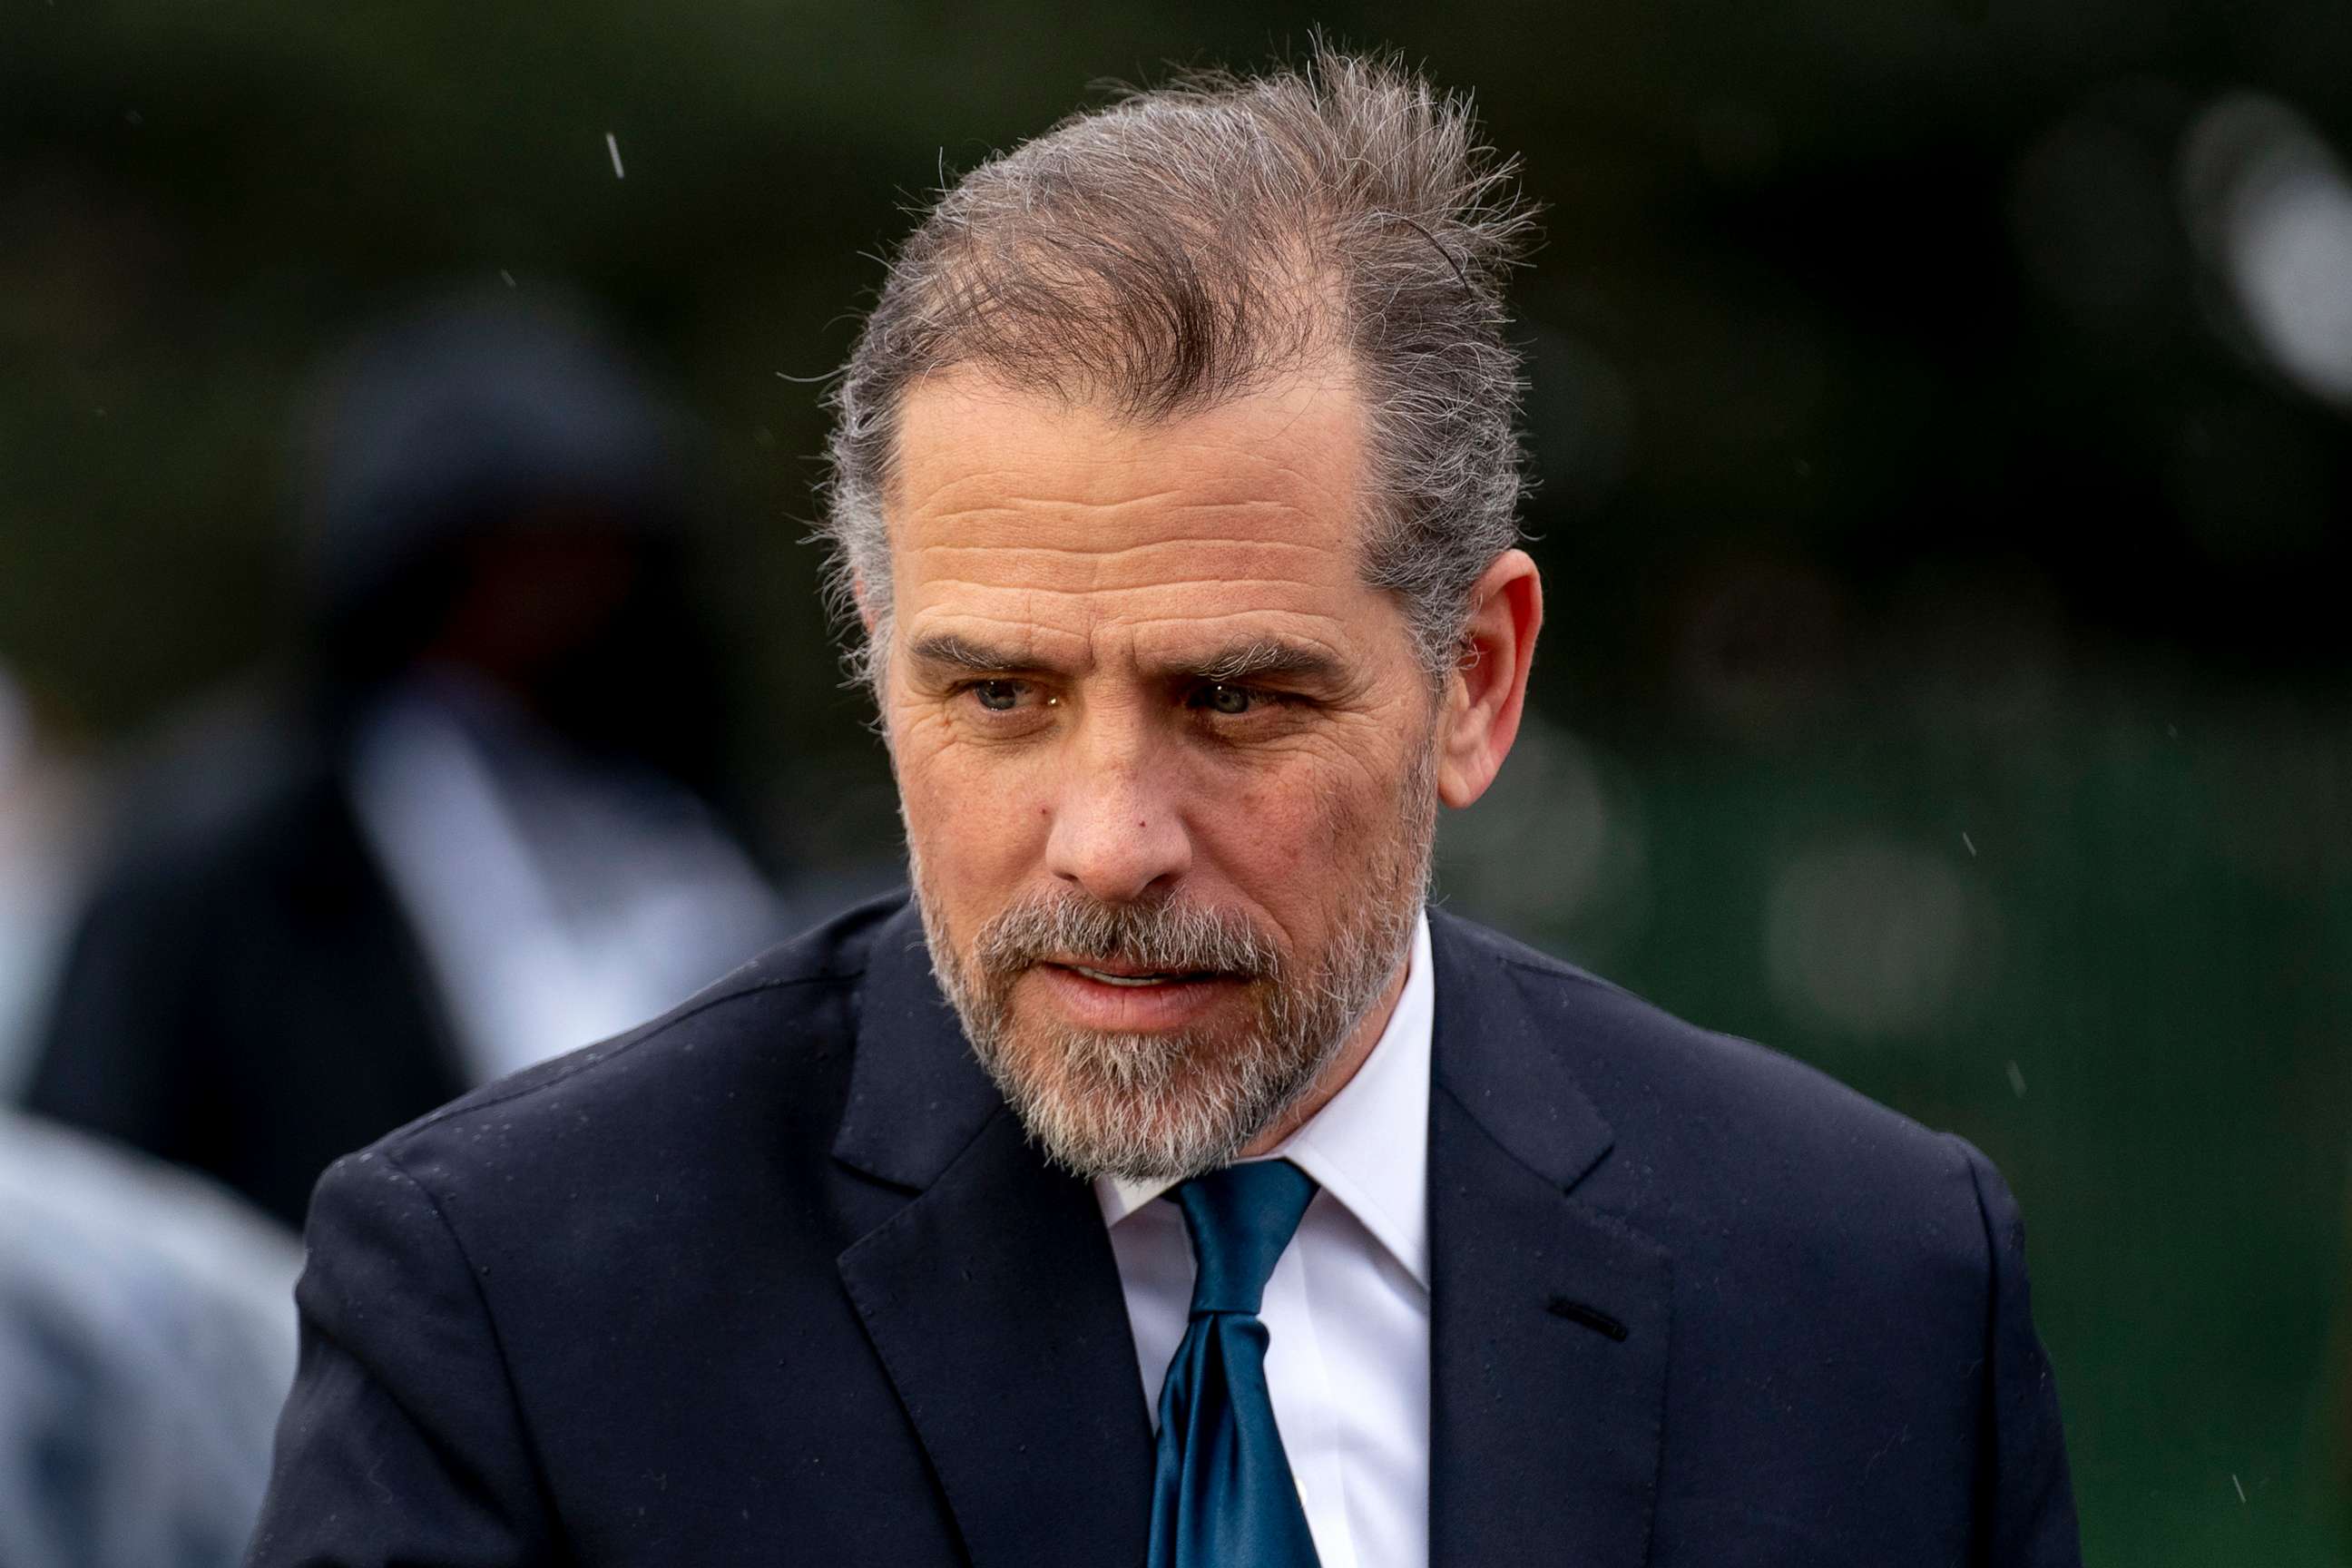 PHOTO: In this April 18, 2022, file photo, Hunter Biden, the son of President Joe Biden, speaks to guests during the White House Easter Egg Roll on the South Lawn of the White House, in Washington, D.C.